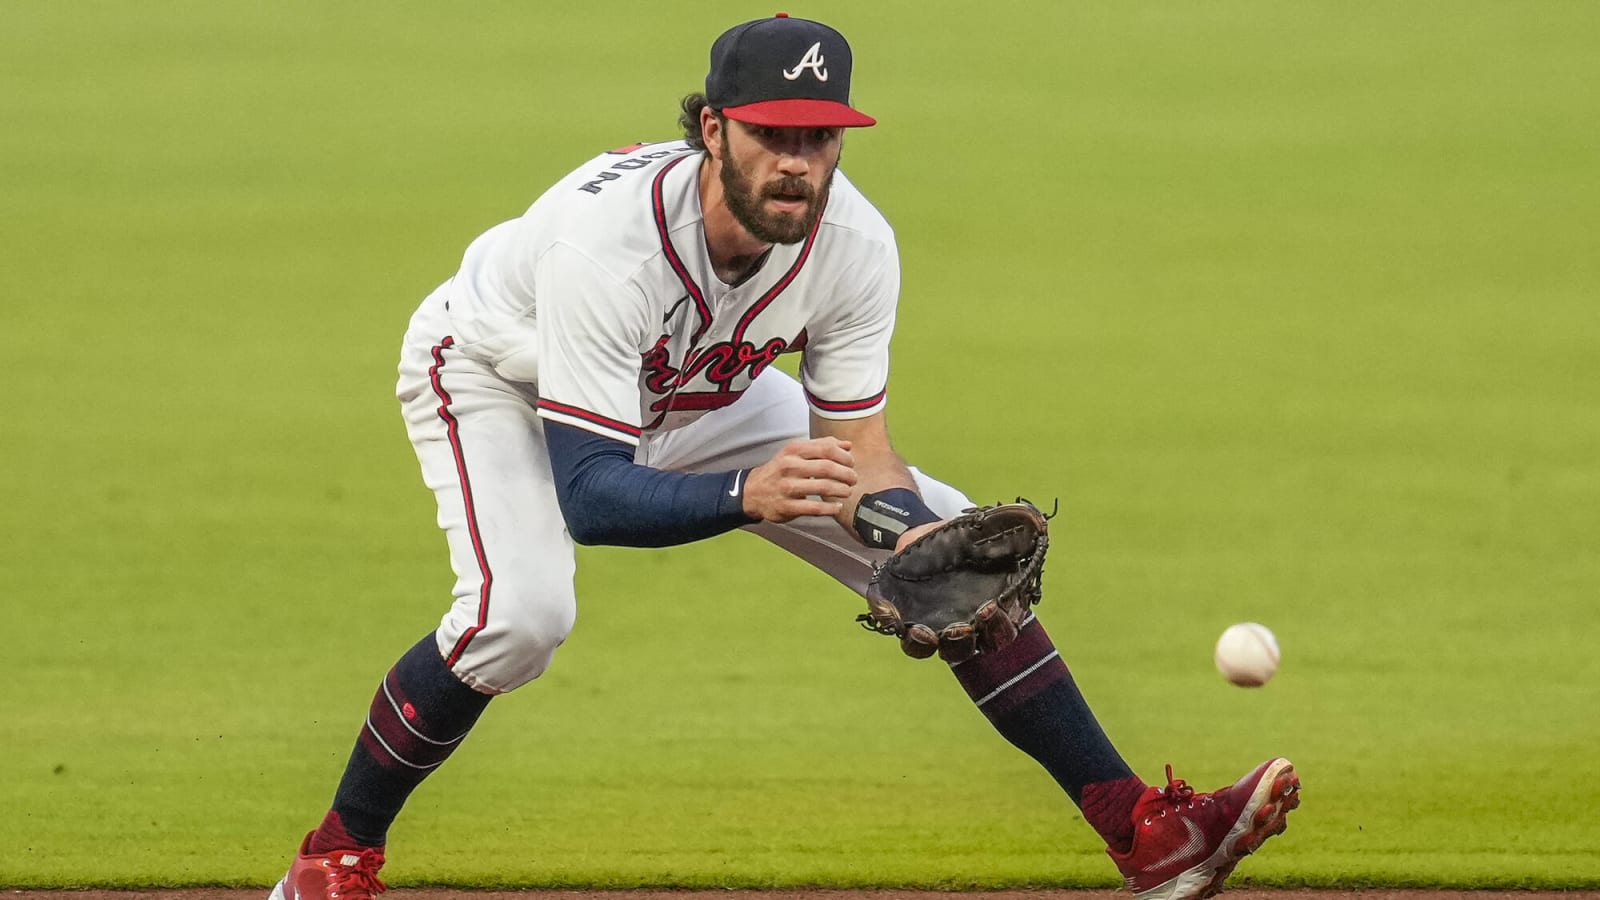 Dansby Swanson 2022 Mix